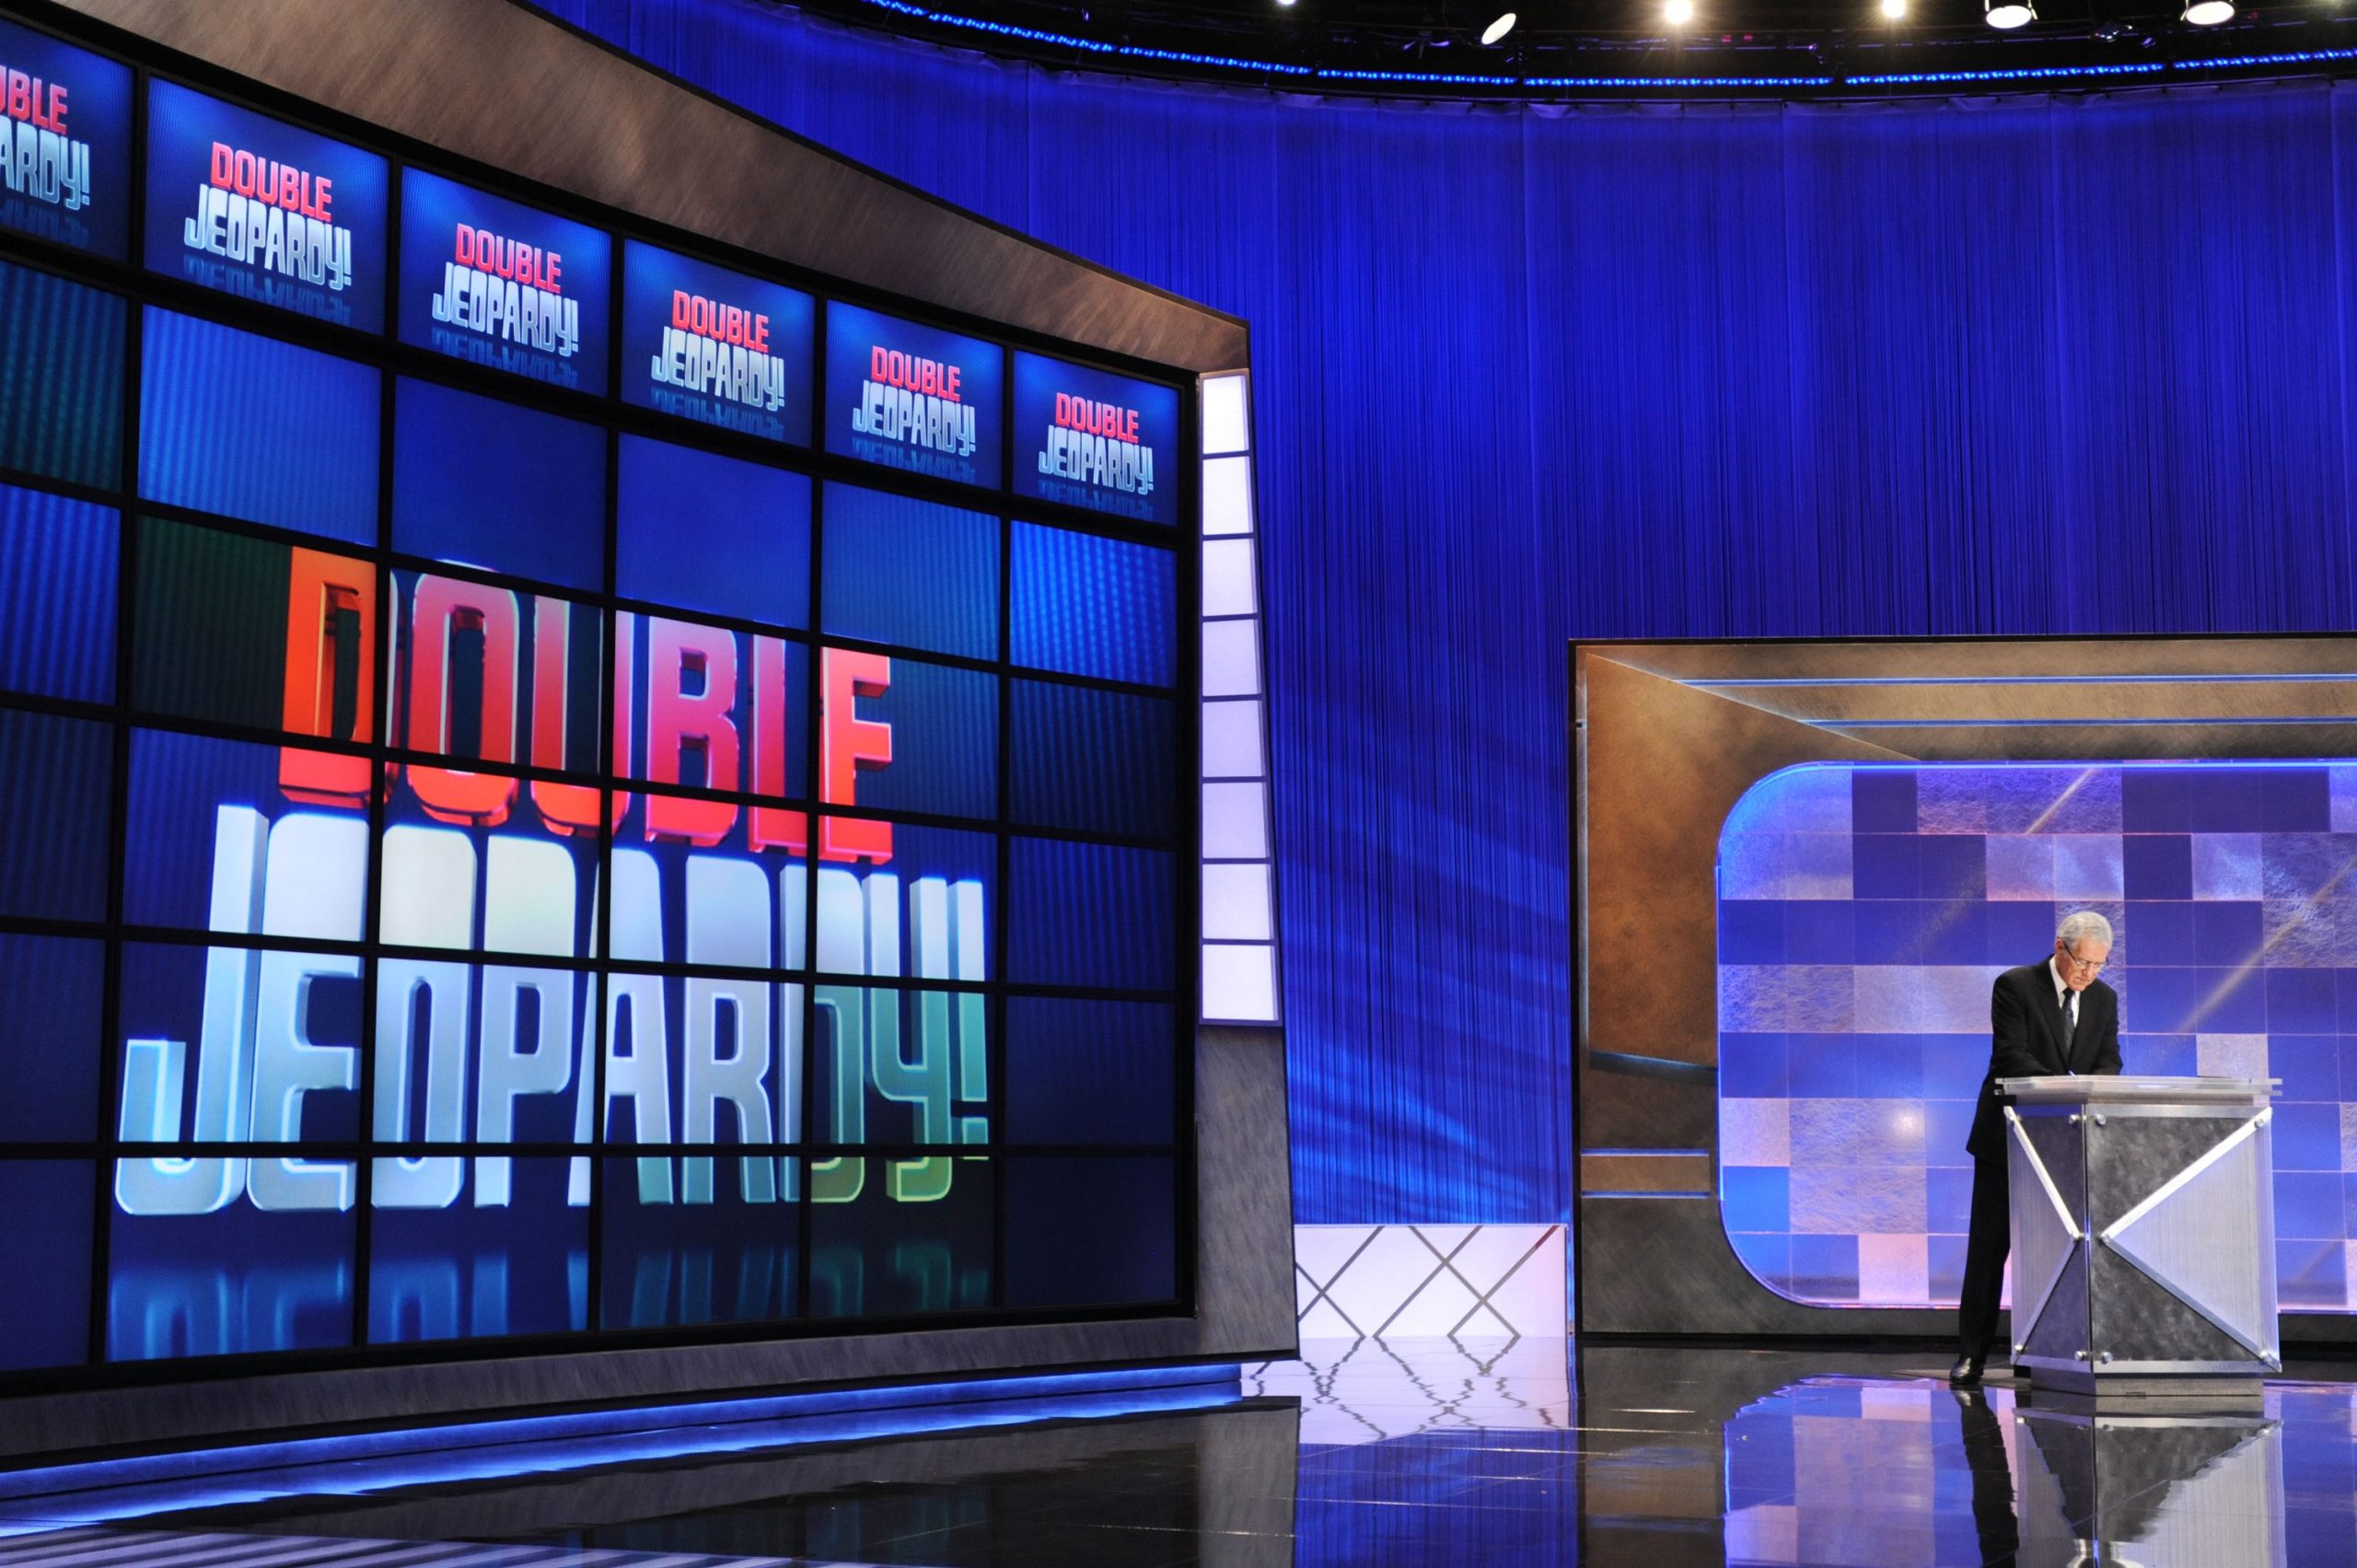 Jeopardy!': How Old Is New Champ Jonathan Fisher?